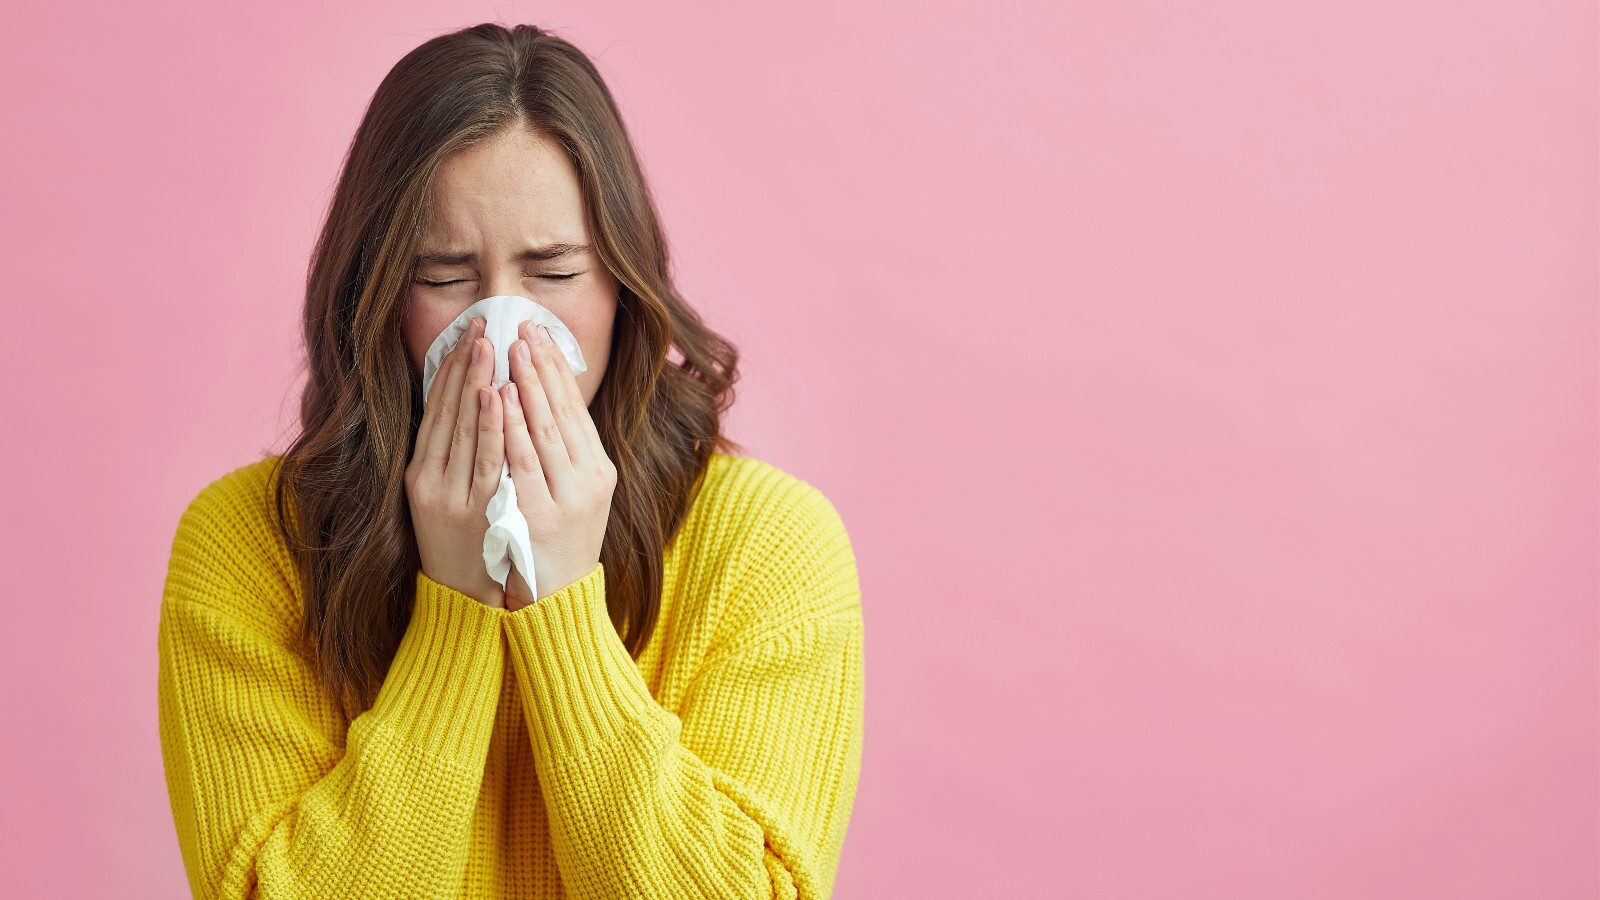 Why is it bad to hold in a sneeze